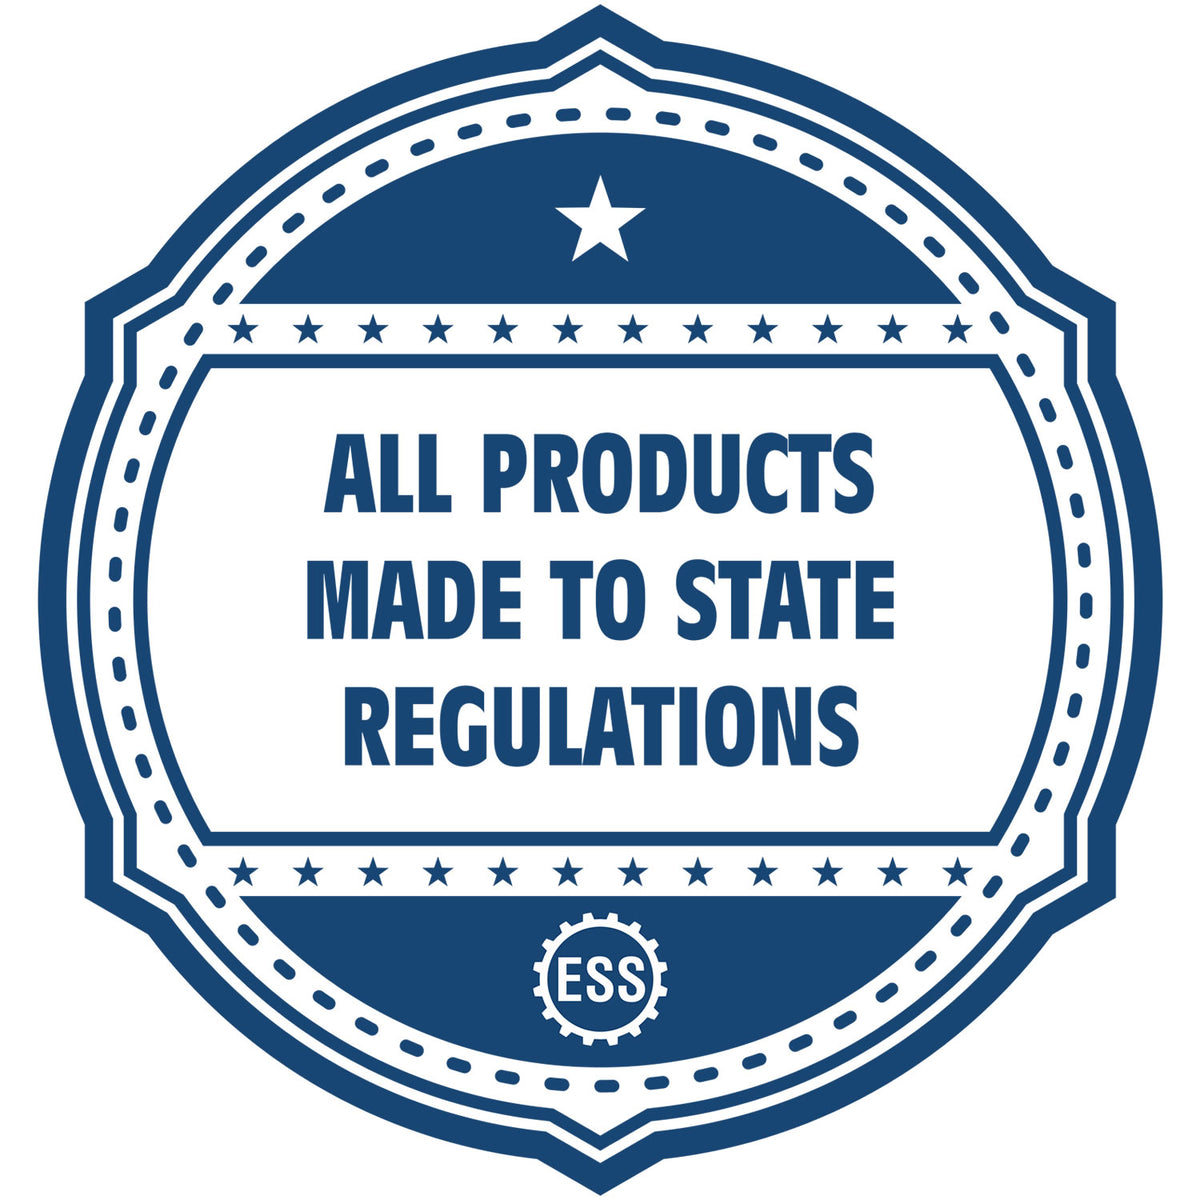 An icon or badge element for the Kentucky Professional Engineer Seal Stamp showing that this product is made in compliance with state regulations.